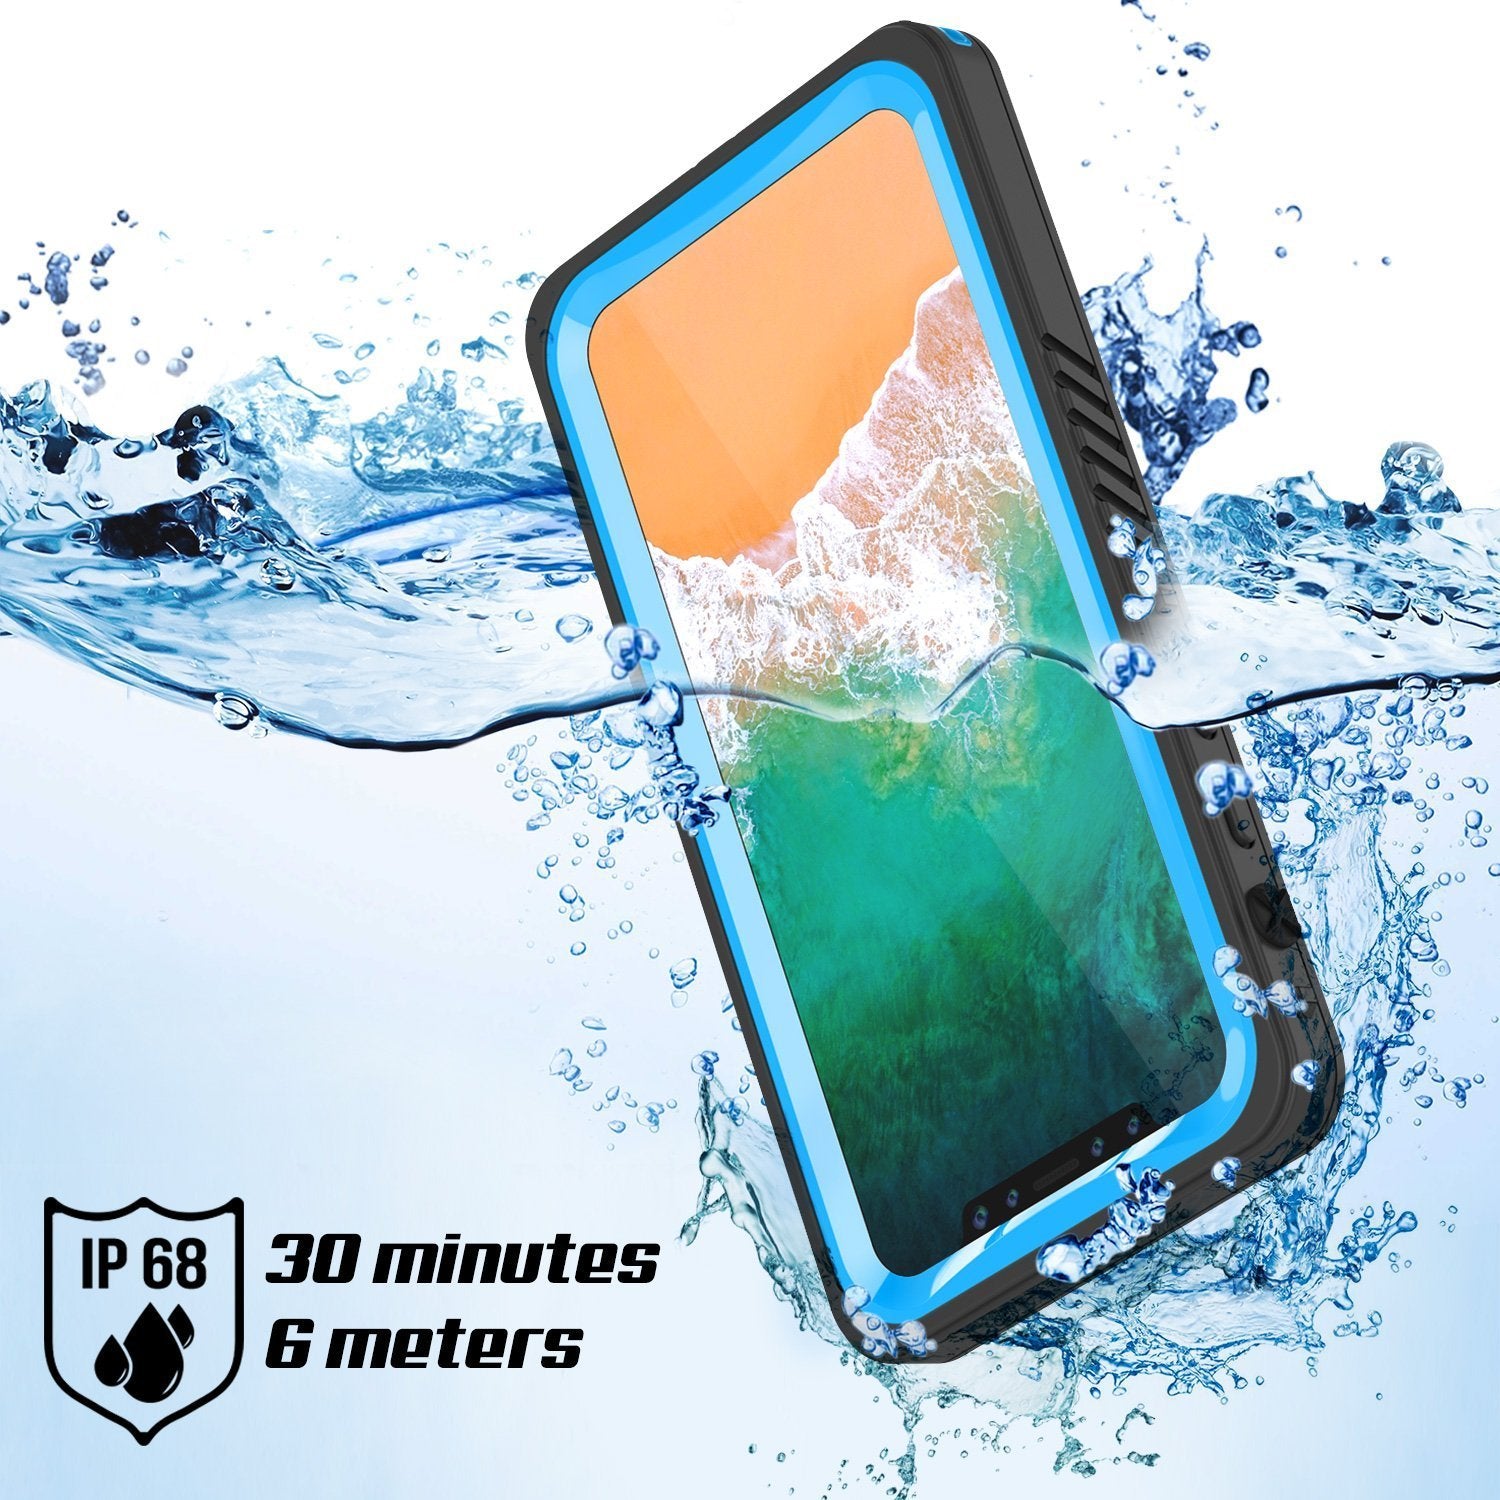 iPhone XS Max Waterproof Case, Punkcase [Extreme Series] Armor Cover W/ Built In Screen Protector [Light Blue]